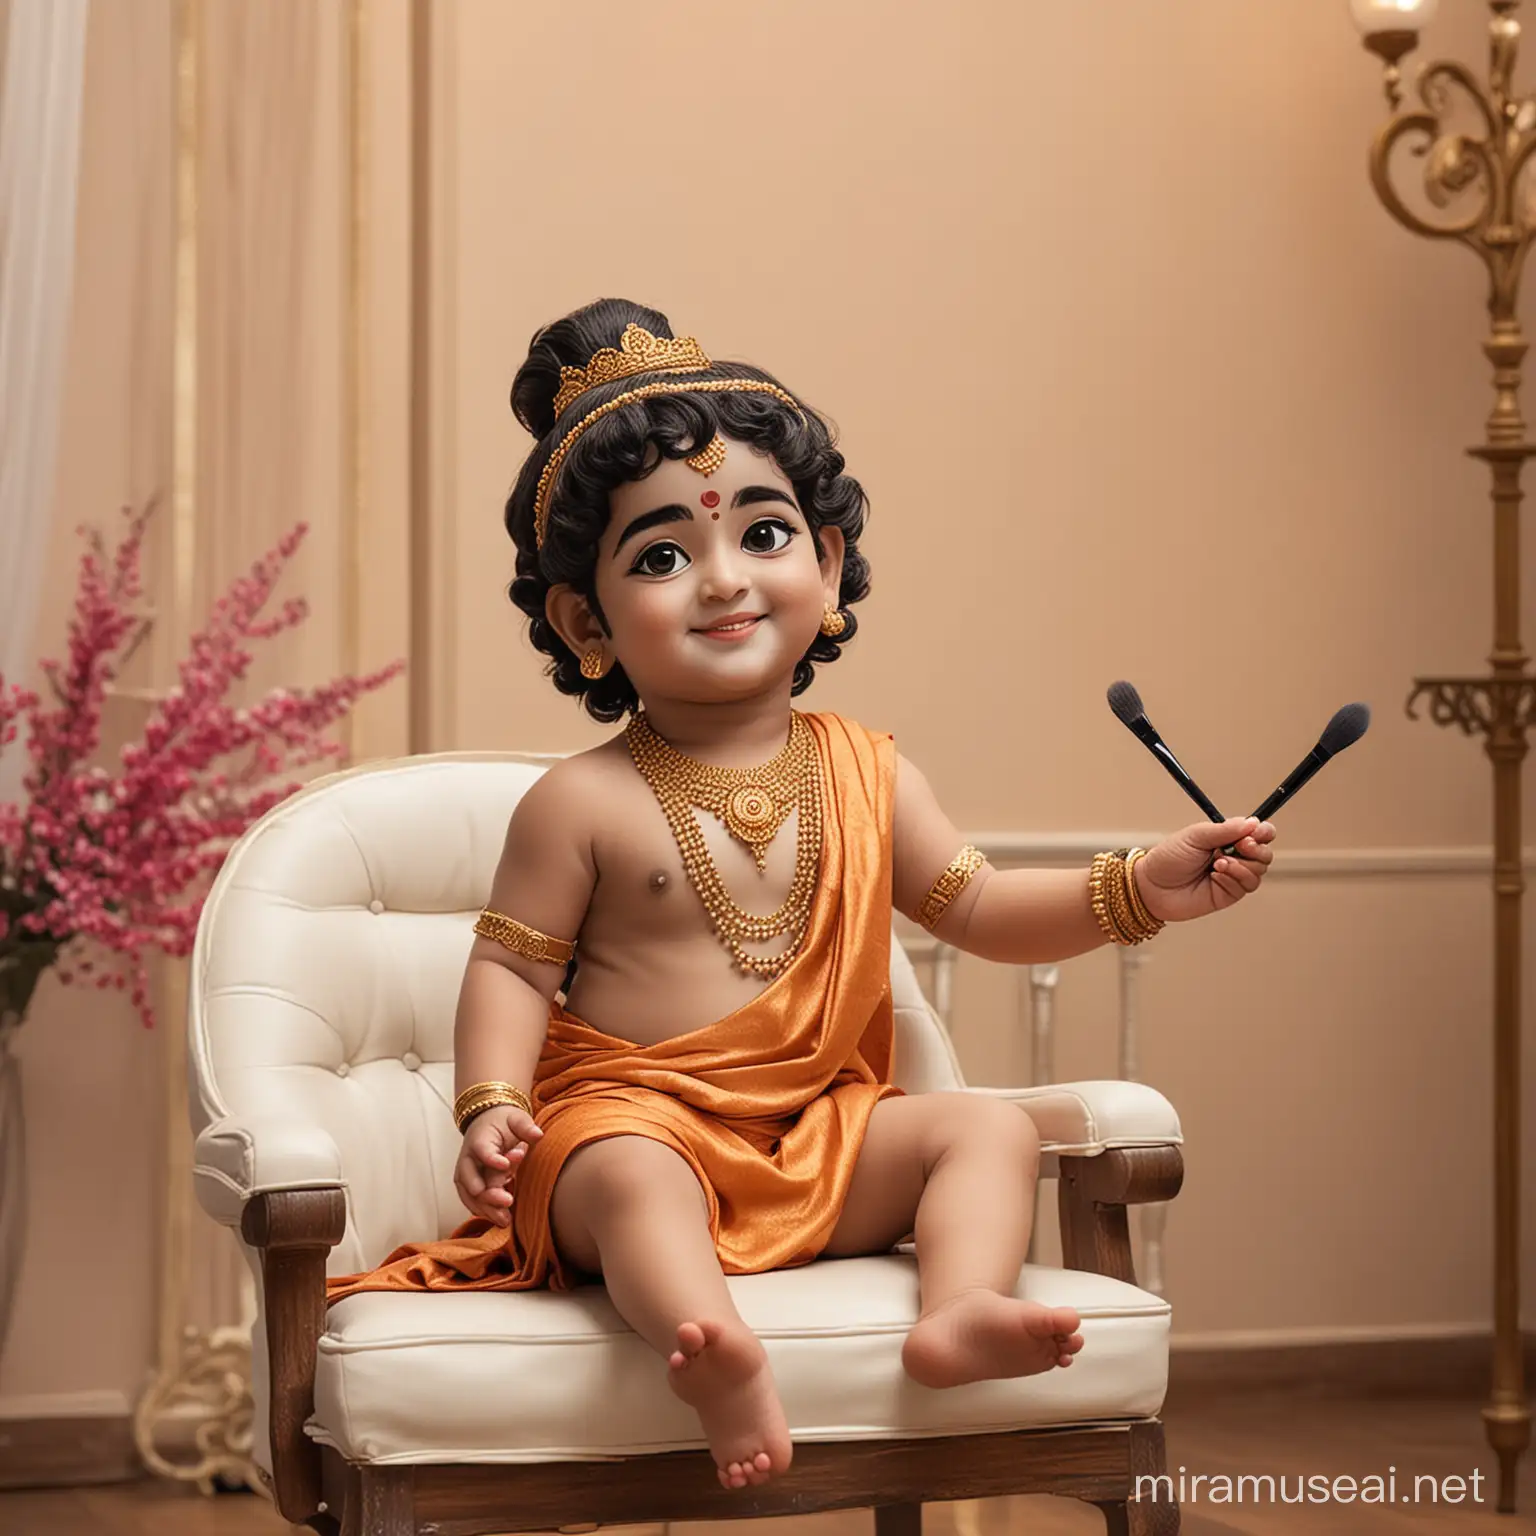 loard little krishna sitting on a salon chair and he picked a makeup brush on his hand with salon background